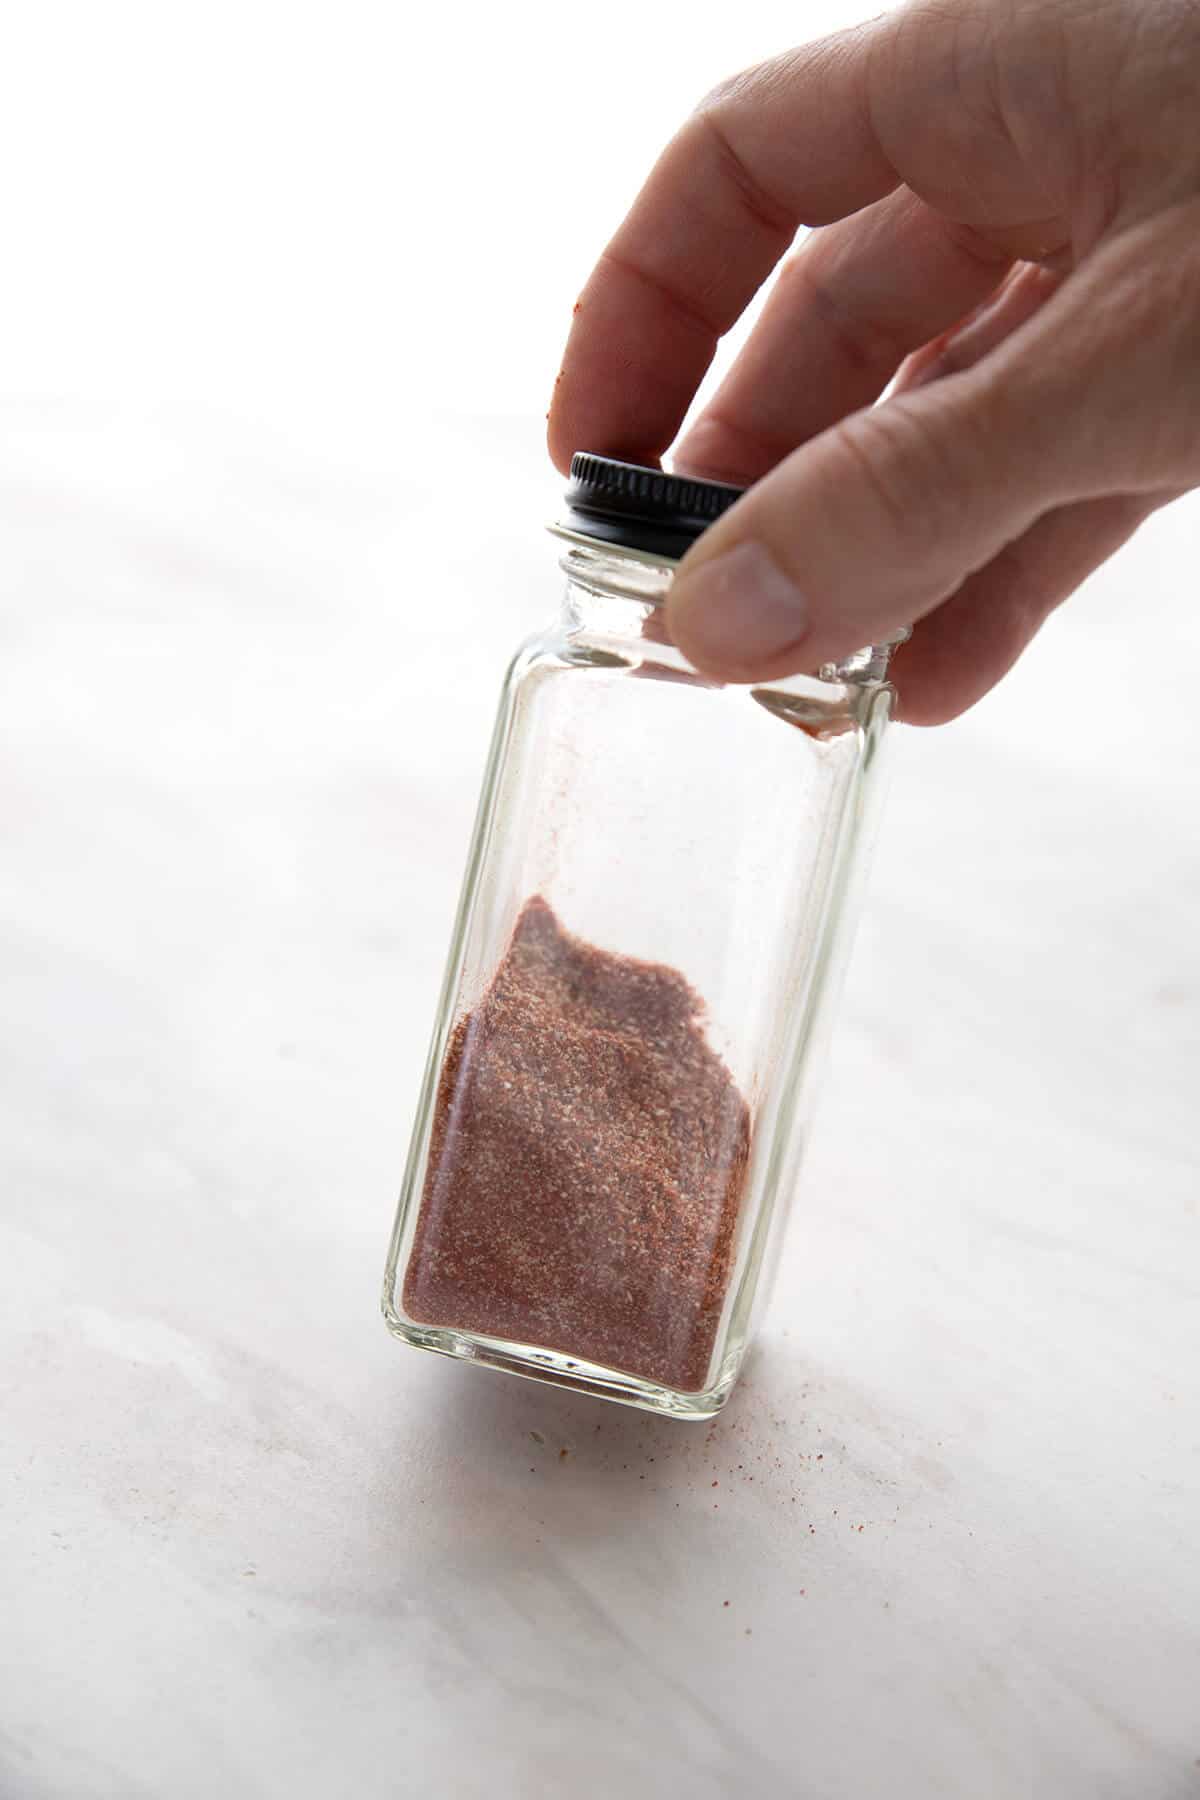 Hand holding a glass spice jar with spice mixture in it